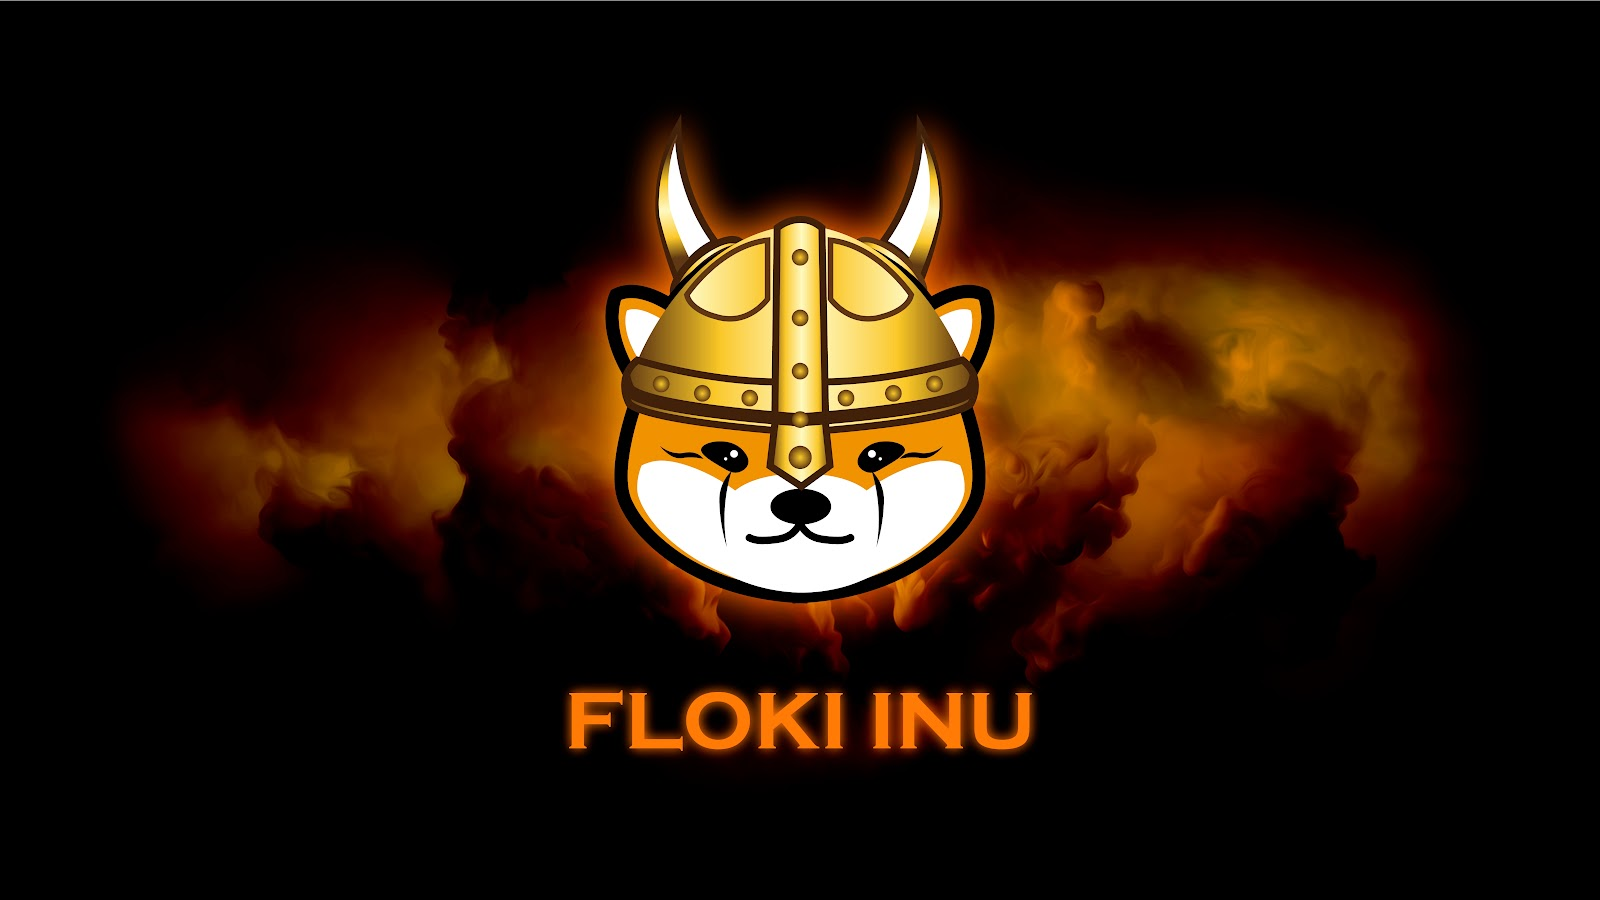 Floki and Pepe Coin Ride Along in Prominence & Investors Position for Surge of this Emerging AI Altcoin